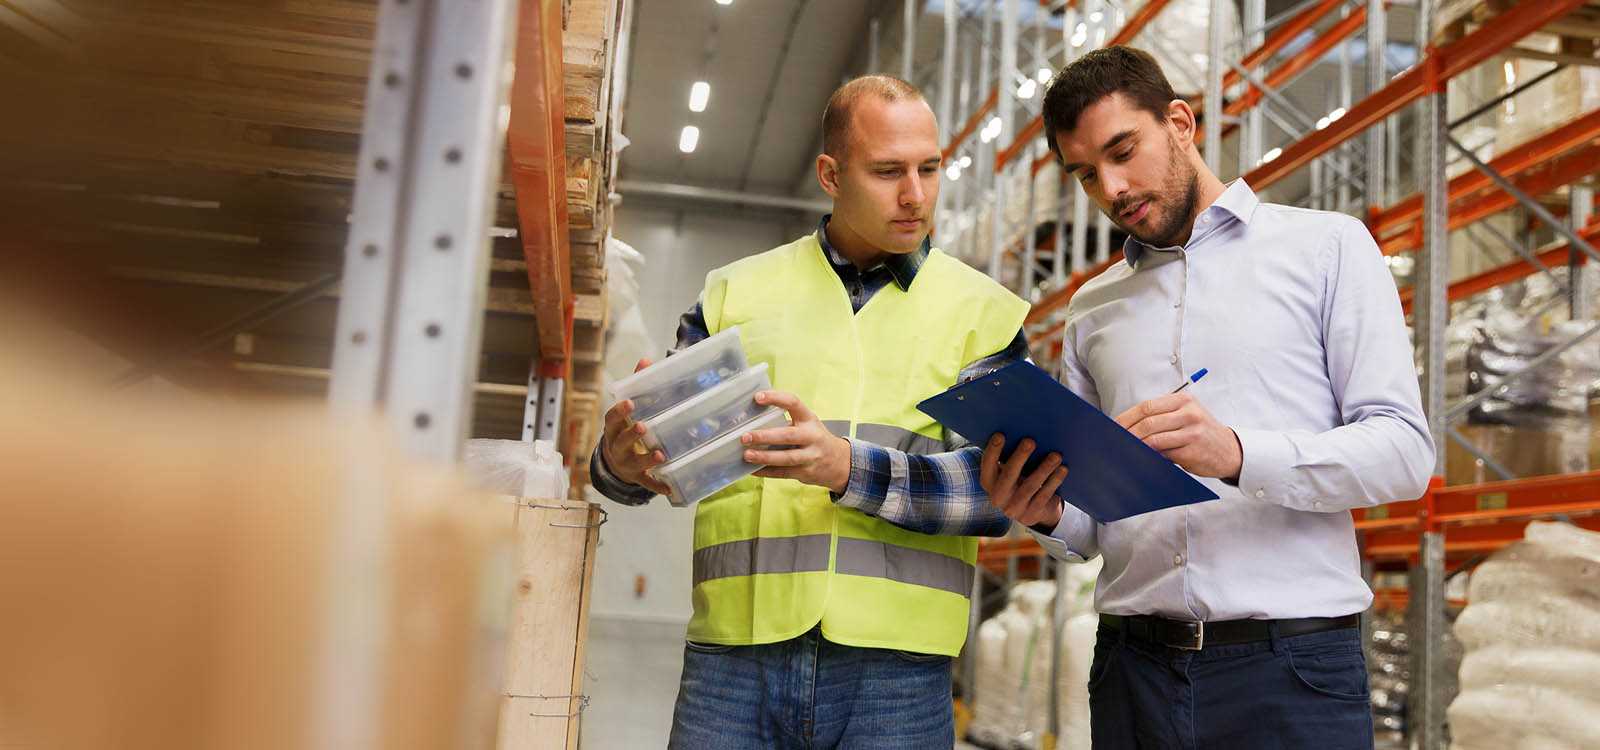 Two men working together in a warehouse